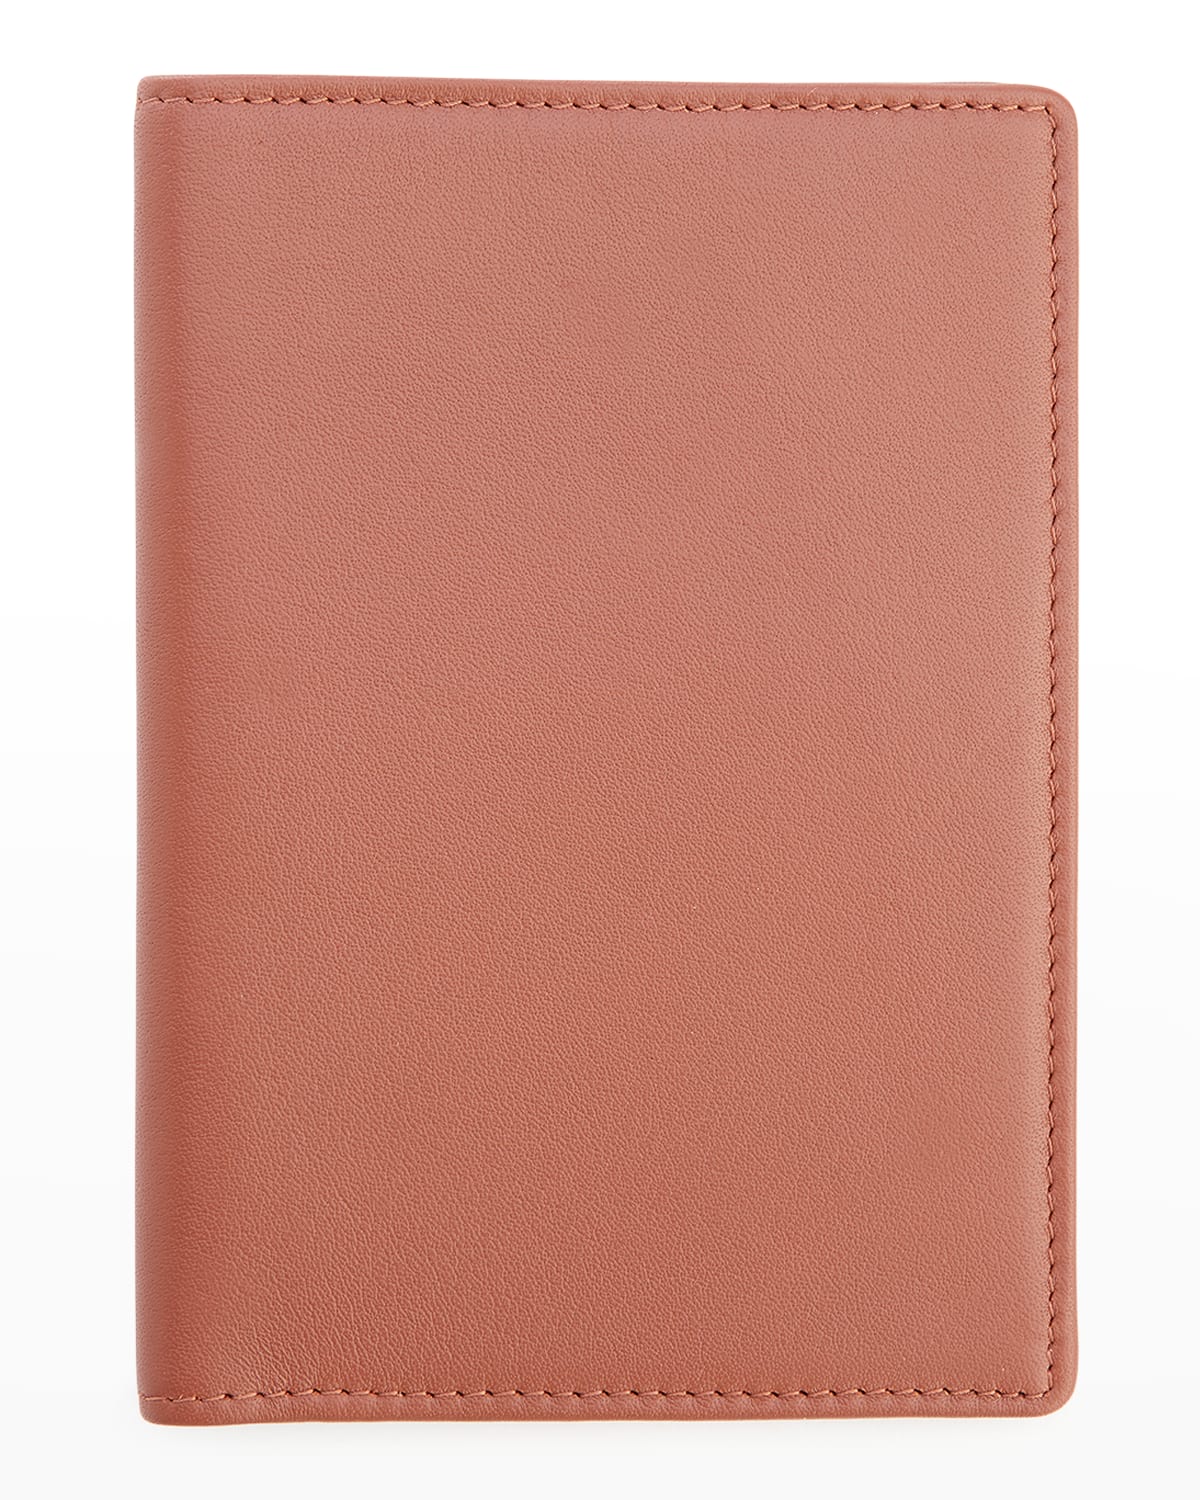 Shop Royce New York Personalized Leather Rfid-blocking Passport Wallet With Vaccine Card Pocket In Tan